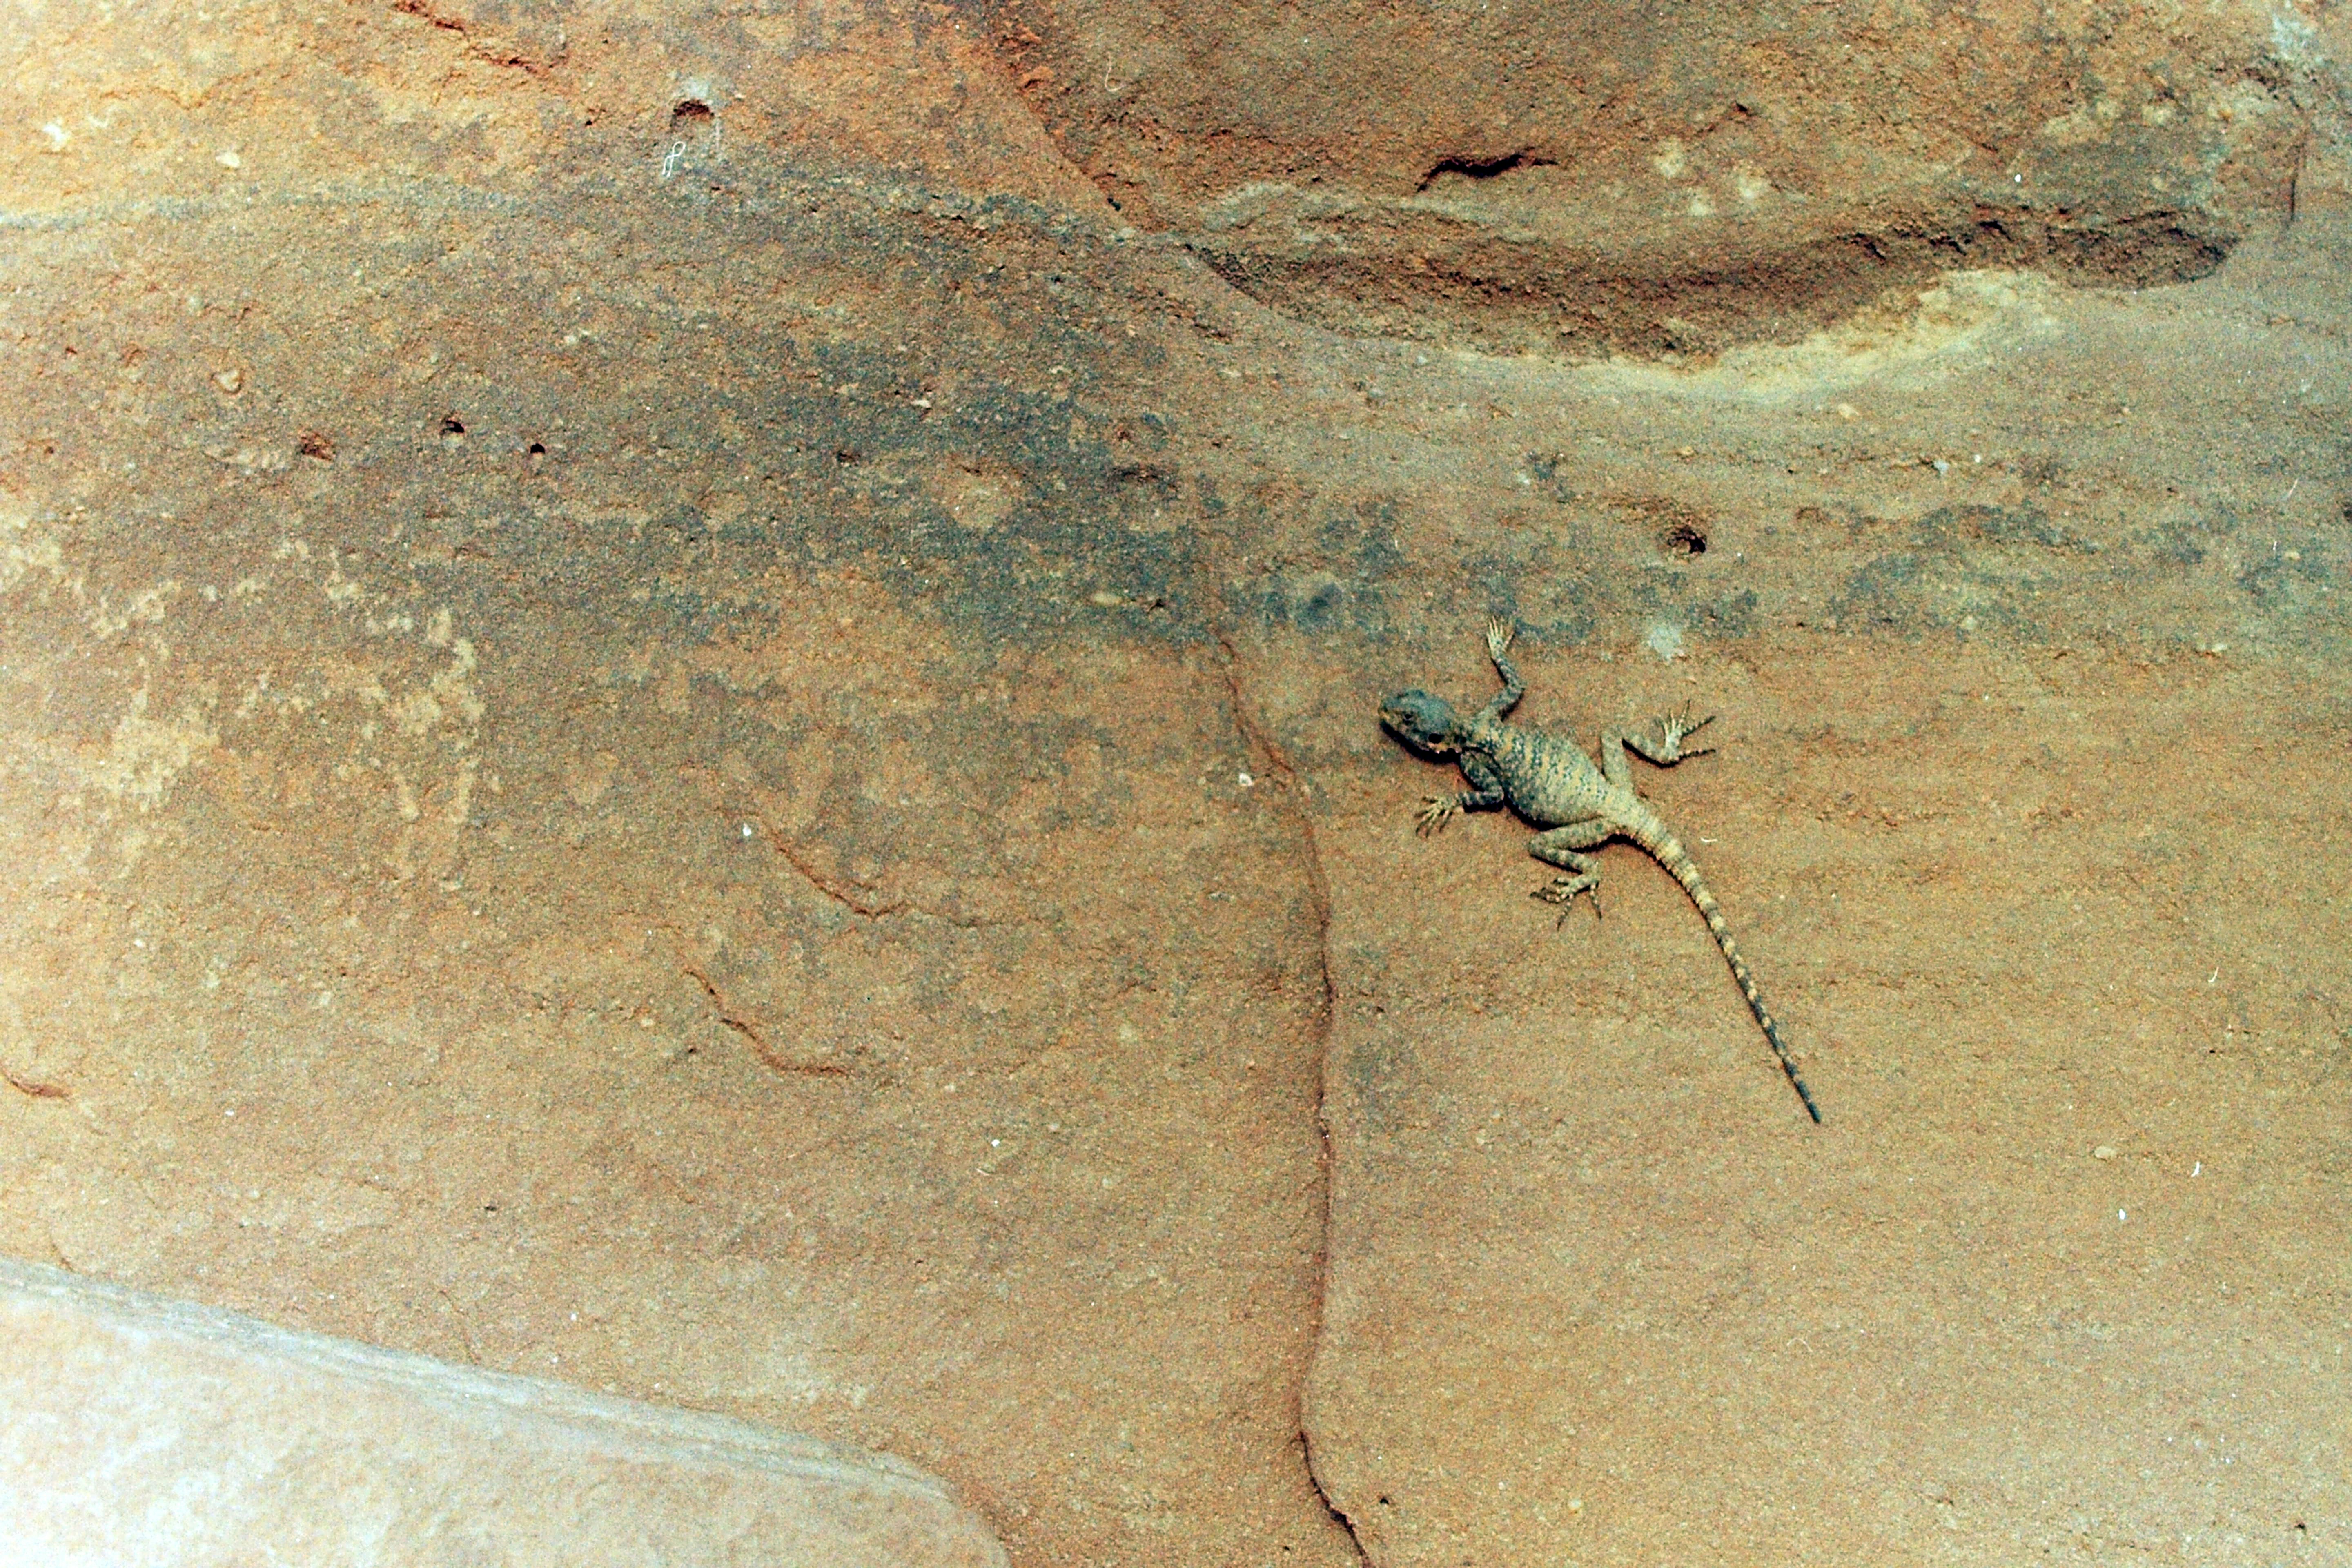 We were lucky to see Petra in 1996. The well know structures built into the rock are spectacular but I was thrilled with this lizard on a rock wall.